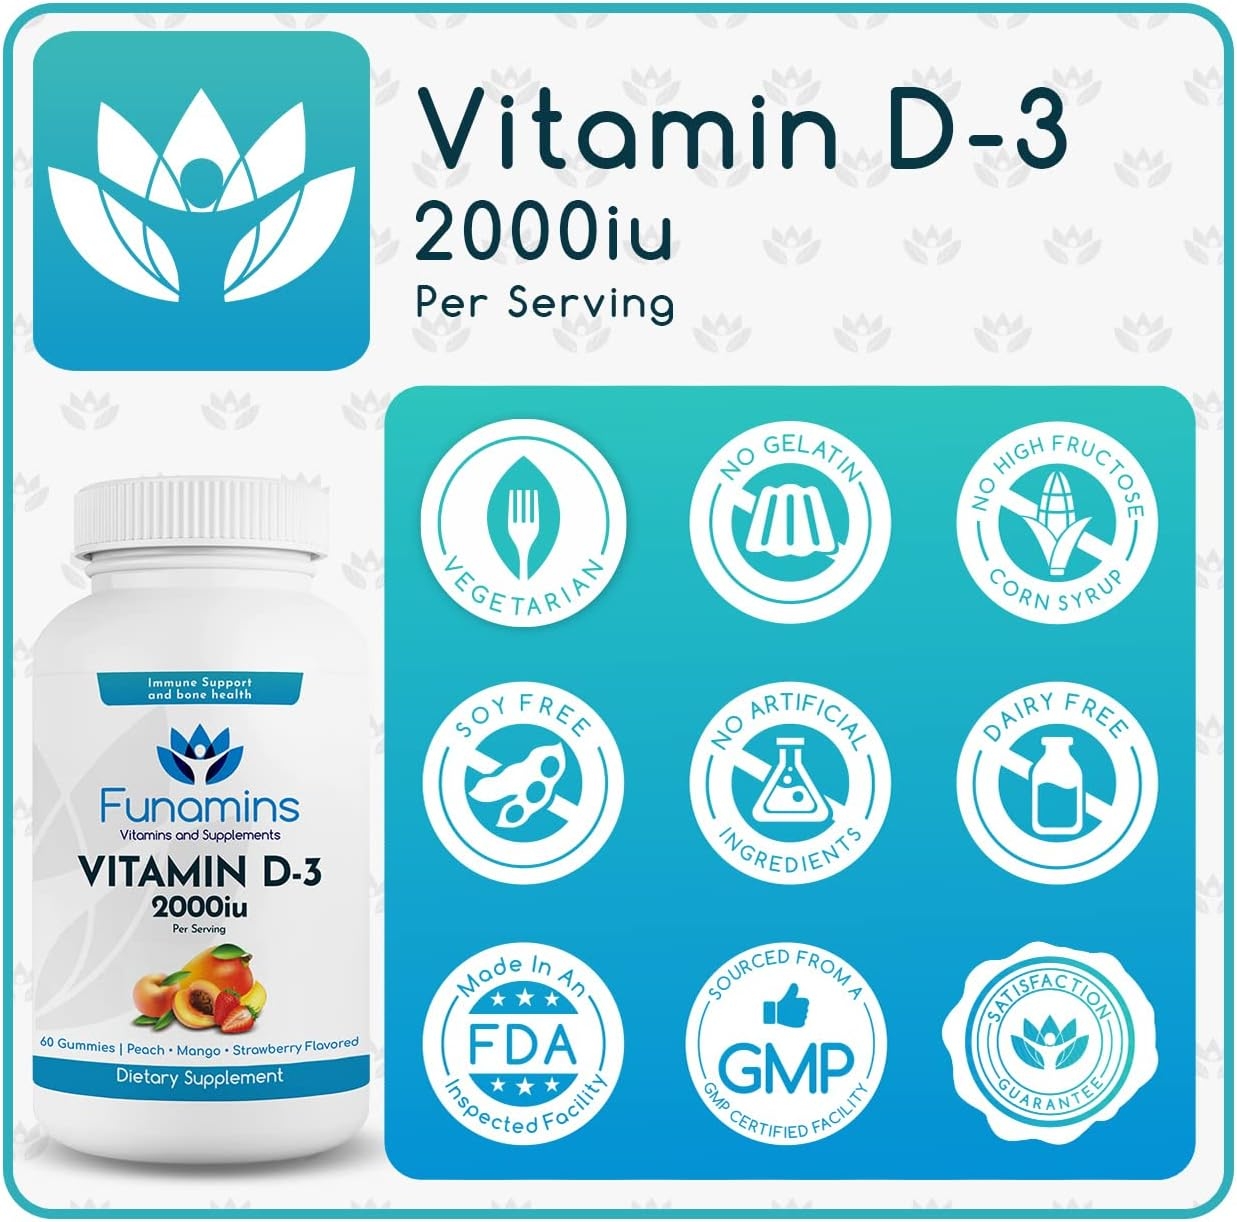 Funamins Vitamin D3 Gummies, 2000iu per Serving, 60 Count, Supports Immune System and Bone Health; for Kids & Adults; Peach, Mango, Strawberry Flavors